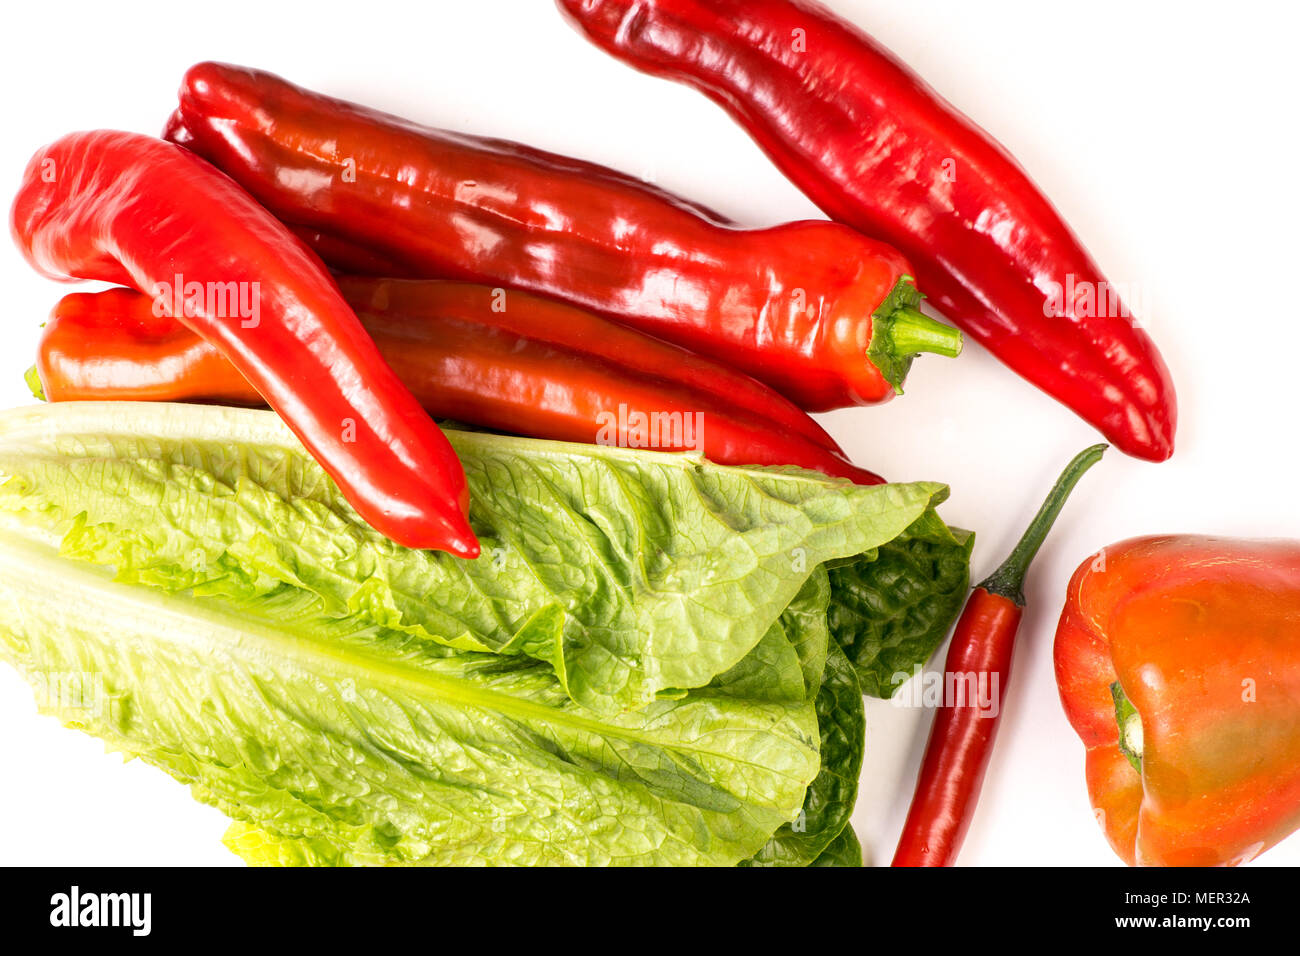 Organic Red Chili, Snack and Bell Pepper and Green Romaine lettuce, isolated on white background Stock Photo